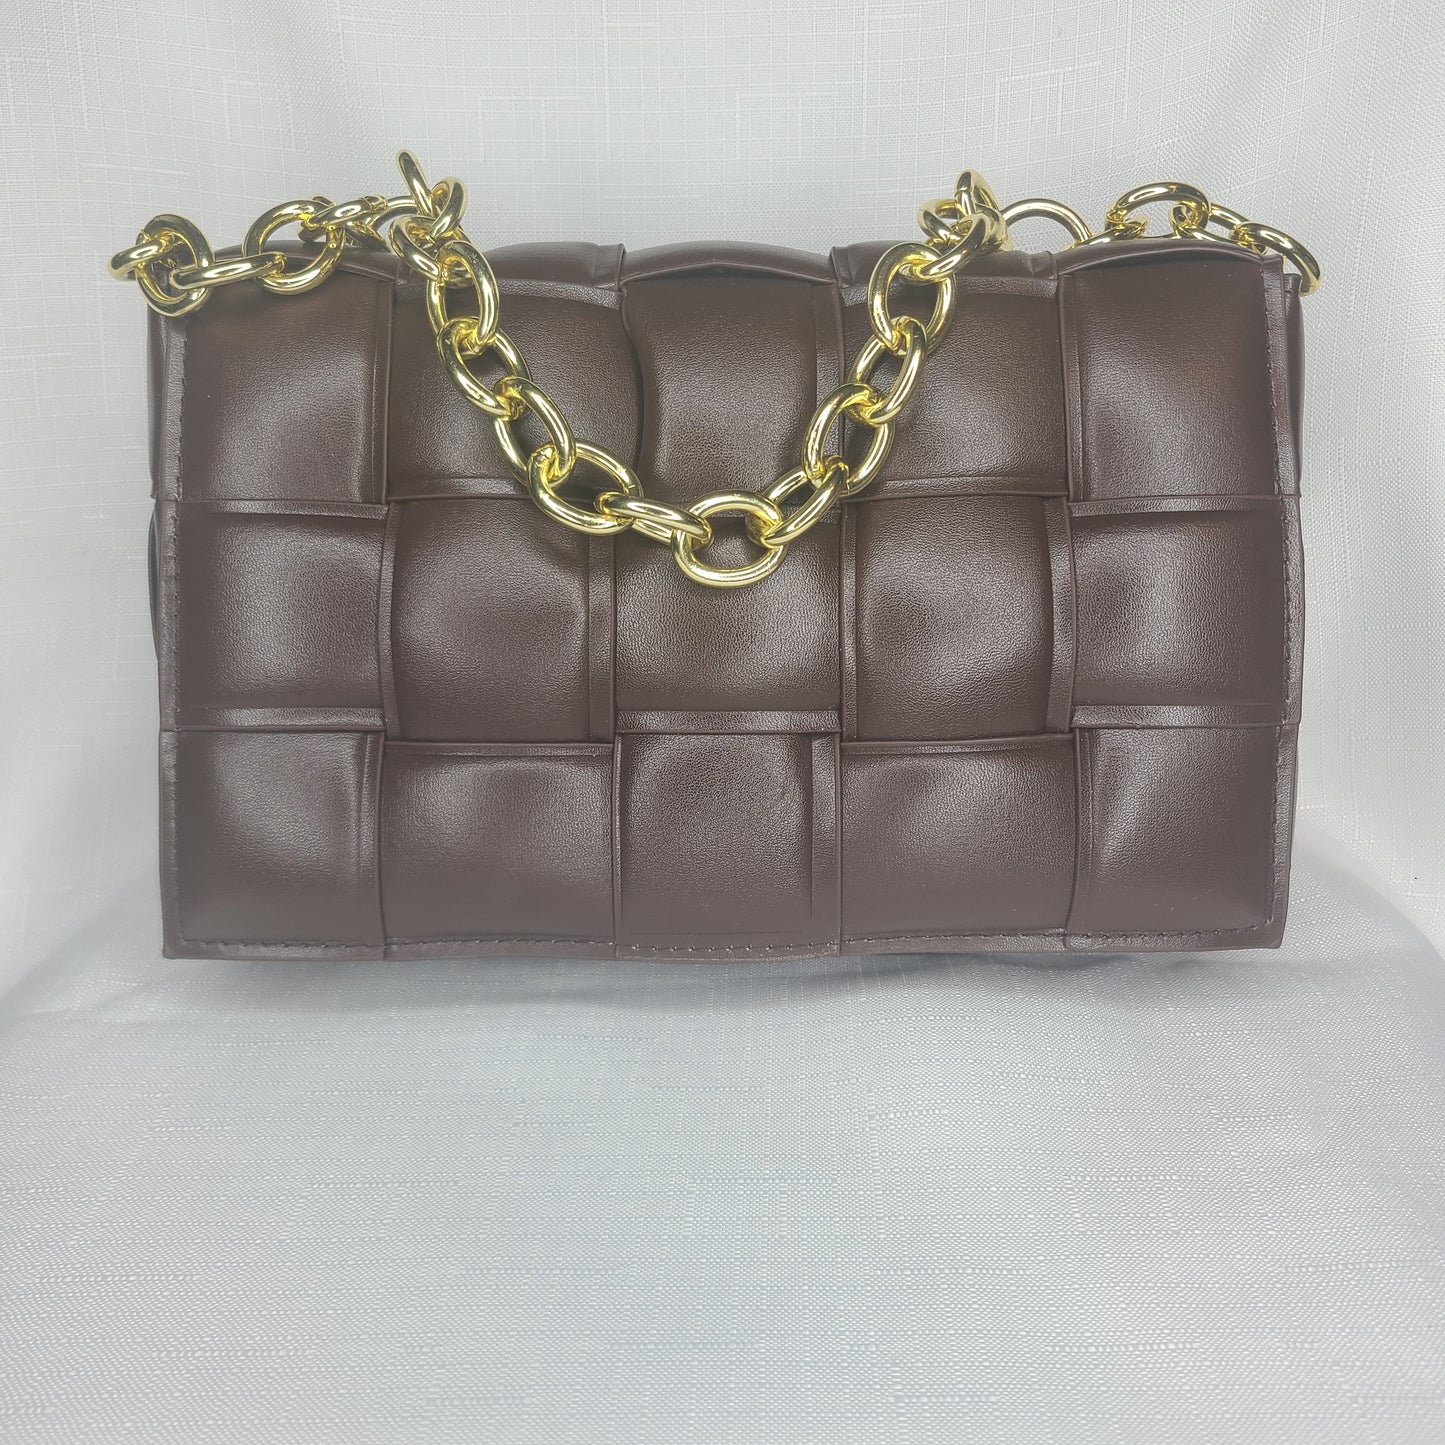 Lux Woven Chain Bag